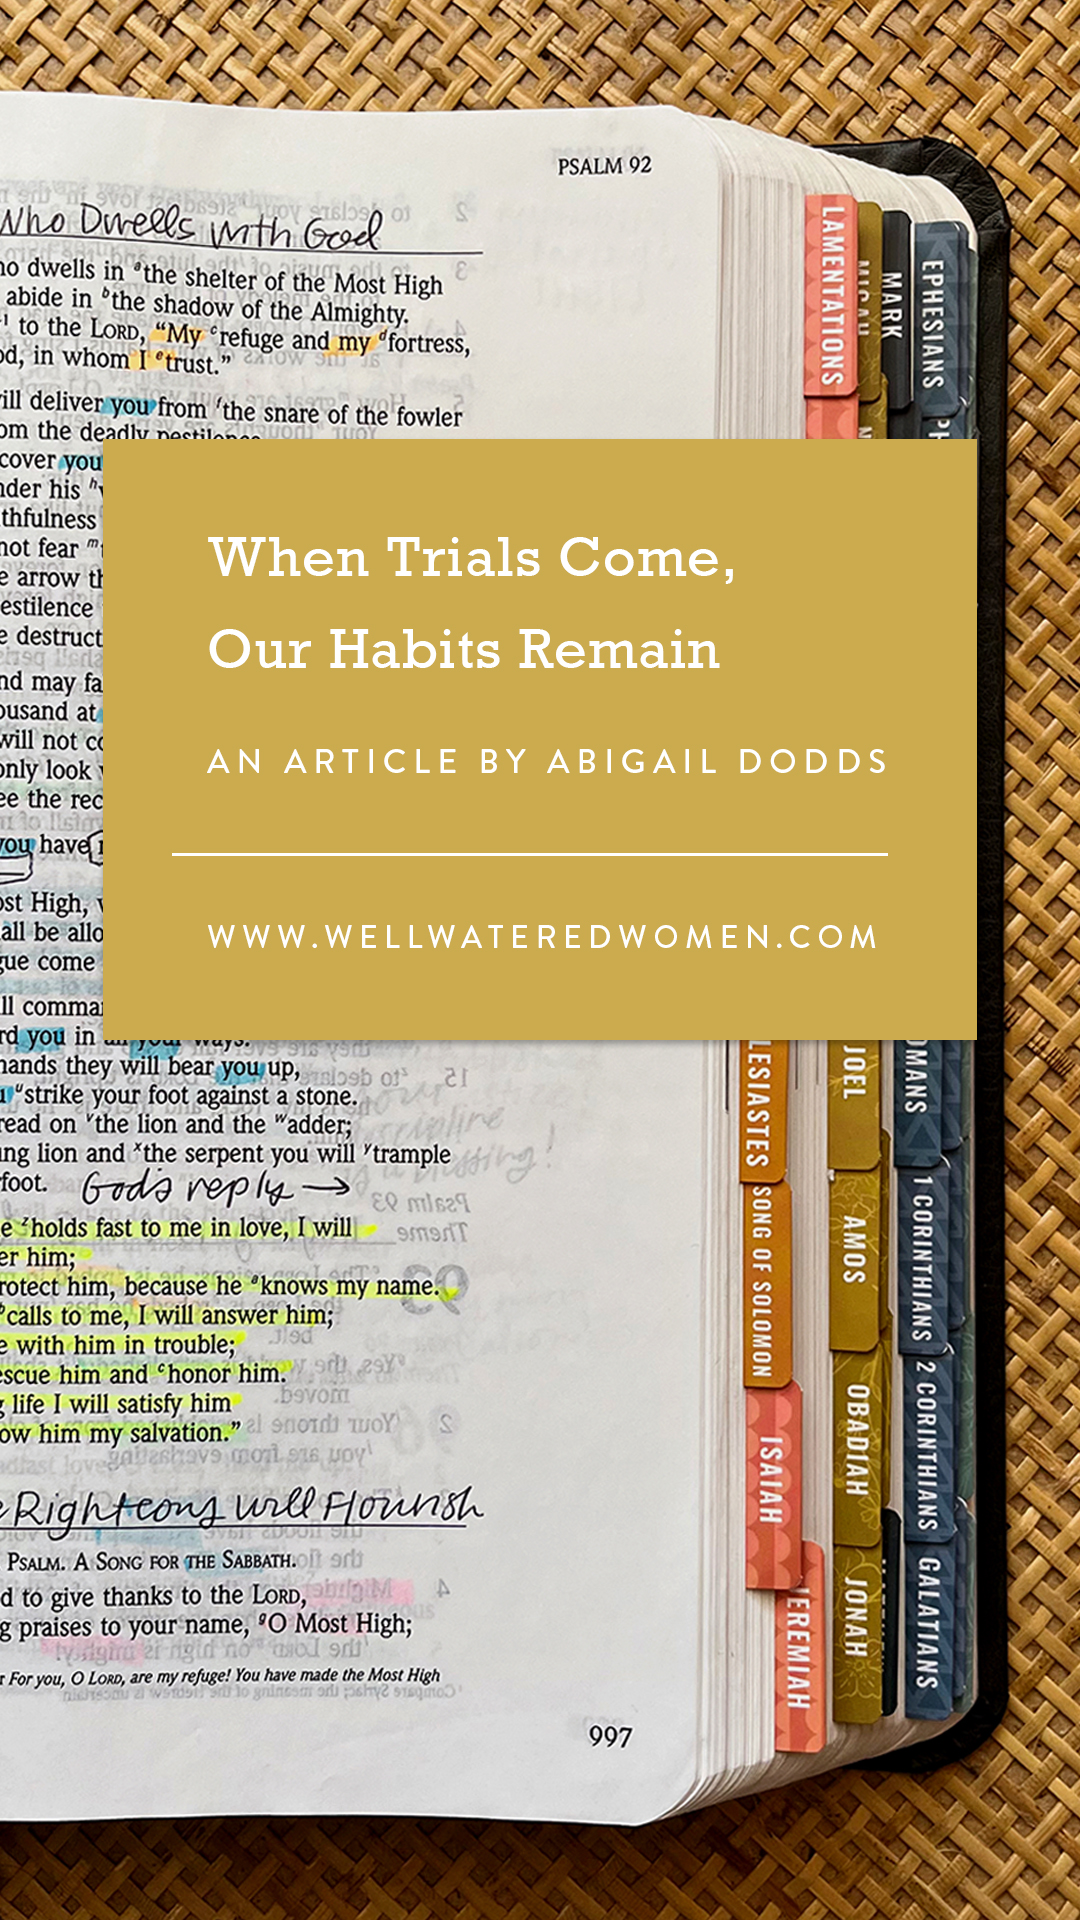 When Trials Come, Our Habits Remain-an Article from Well-Watered Women